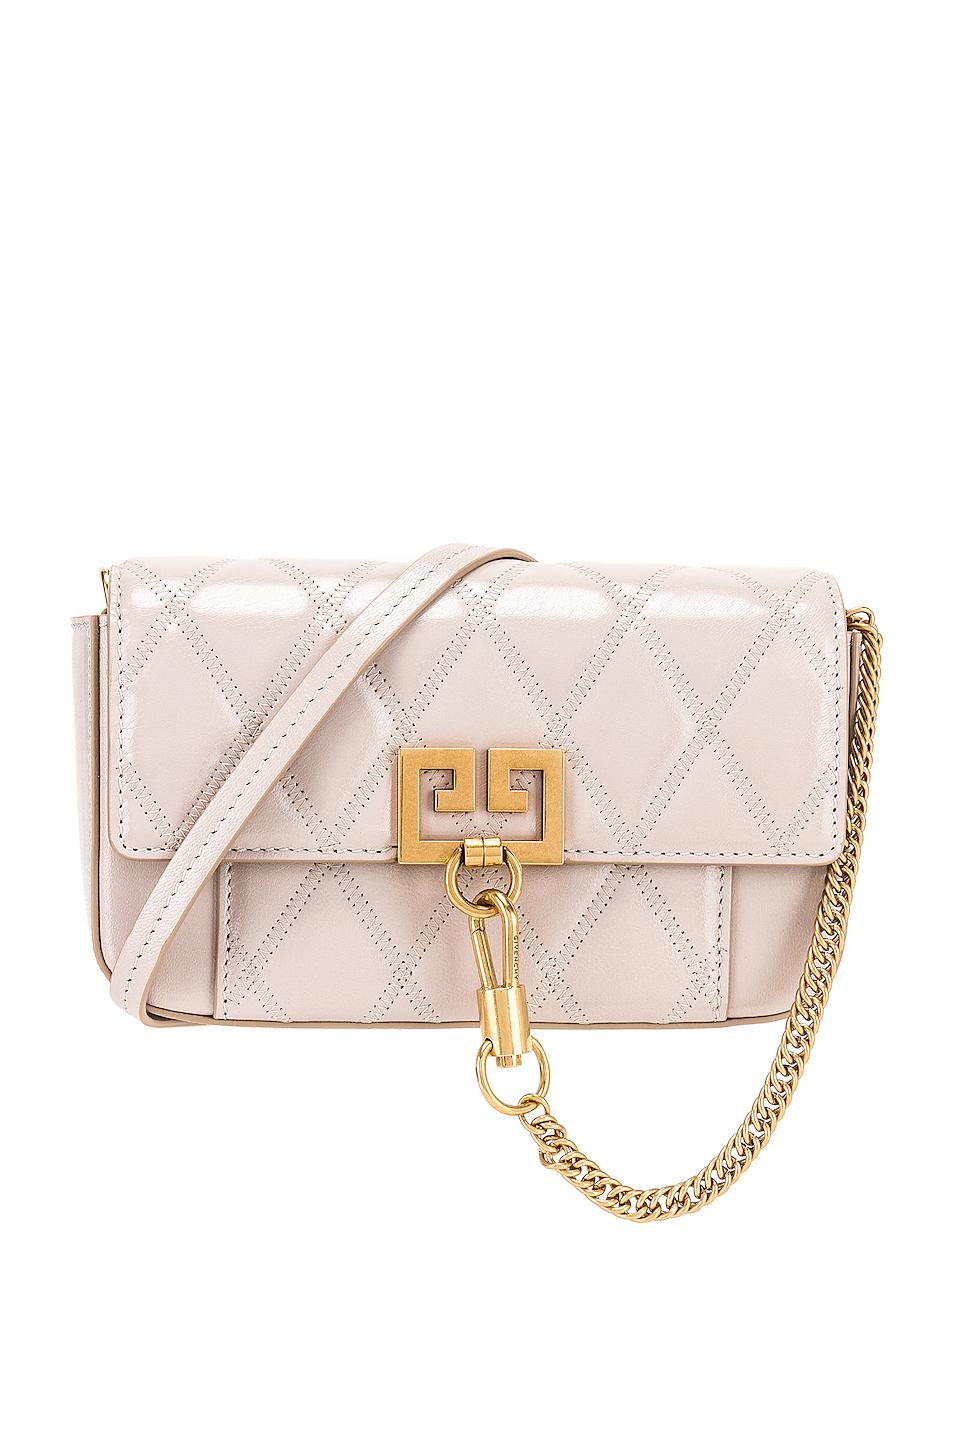 Lyst - Givenchy Mini Pocket Quilted Leather Bag in Natural